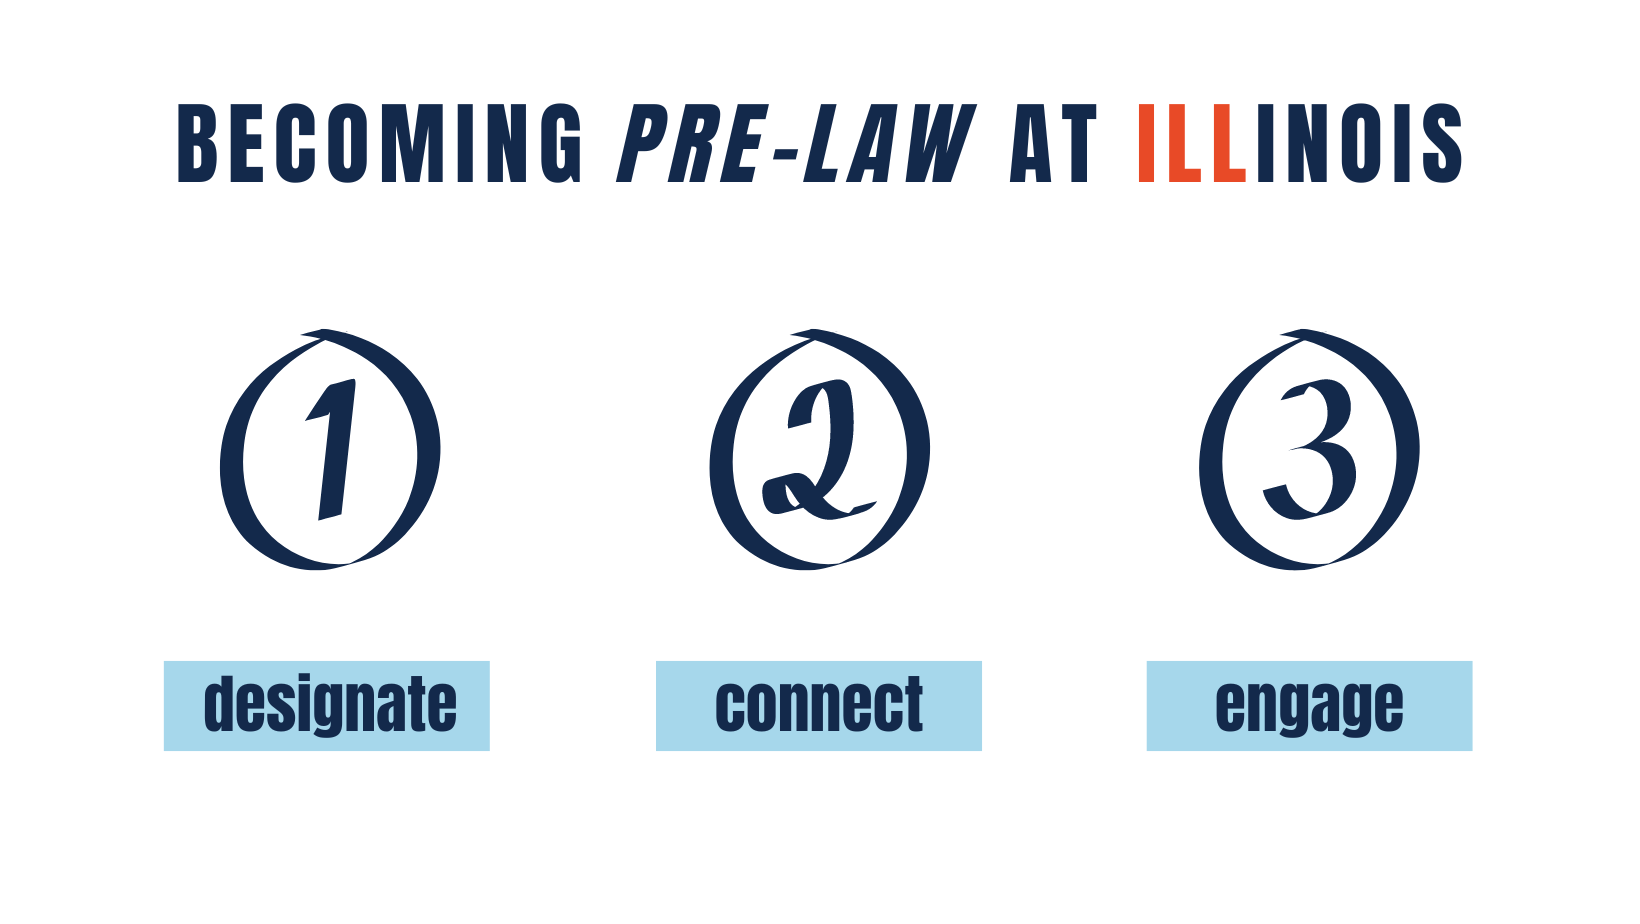 3 steps to becoming prelaw at Illinois